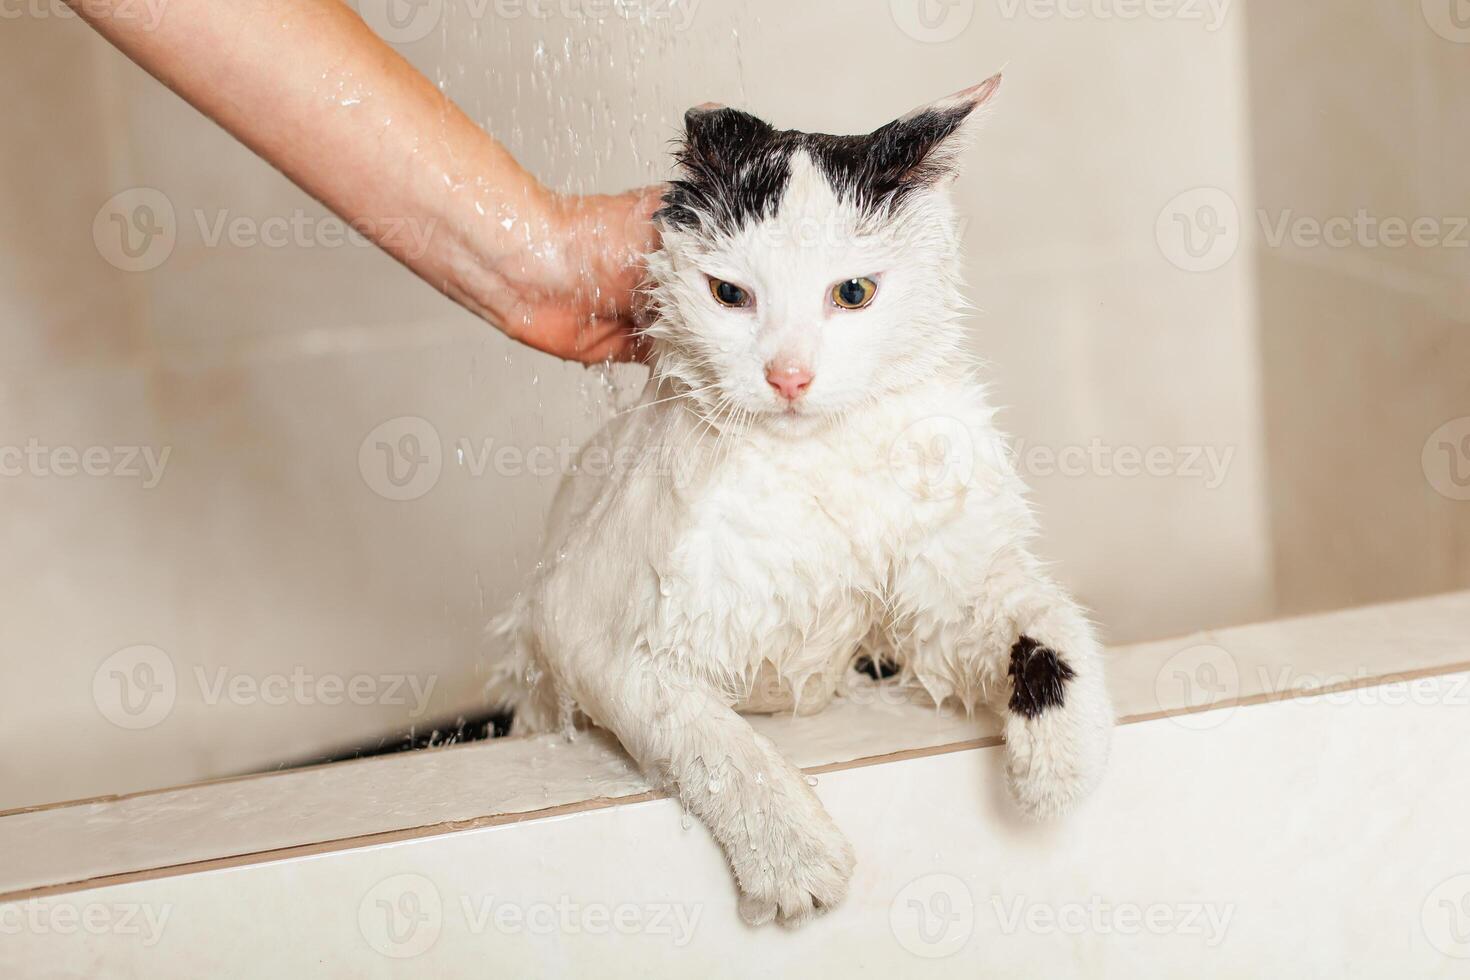 Bath or shower to a Persian breed cat Moldova, Bender, July 5, 2020, Bender Fortress, children's flat photo